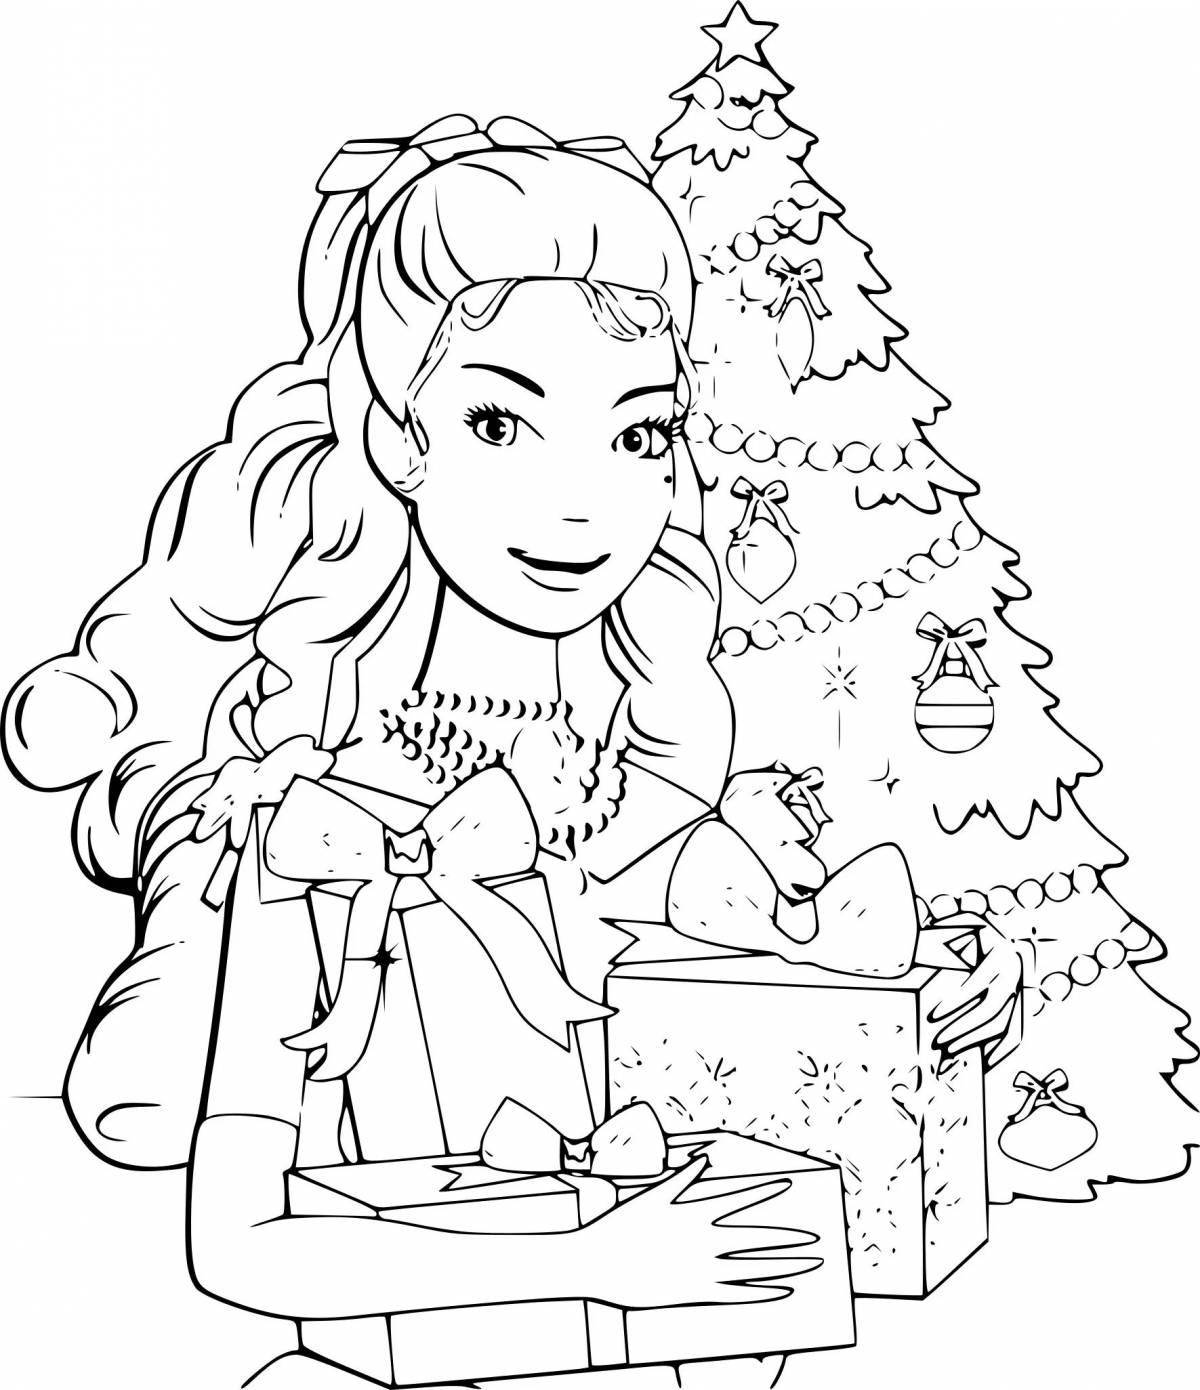 Soulful Christmas coloring for girls 10 years old